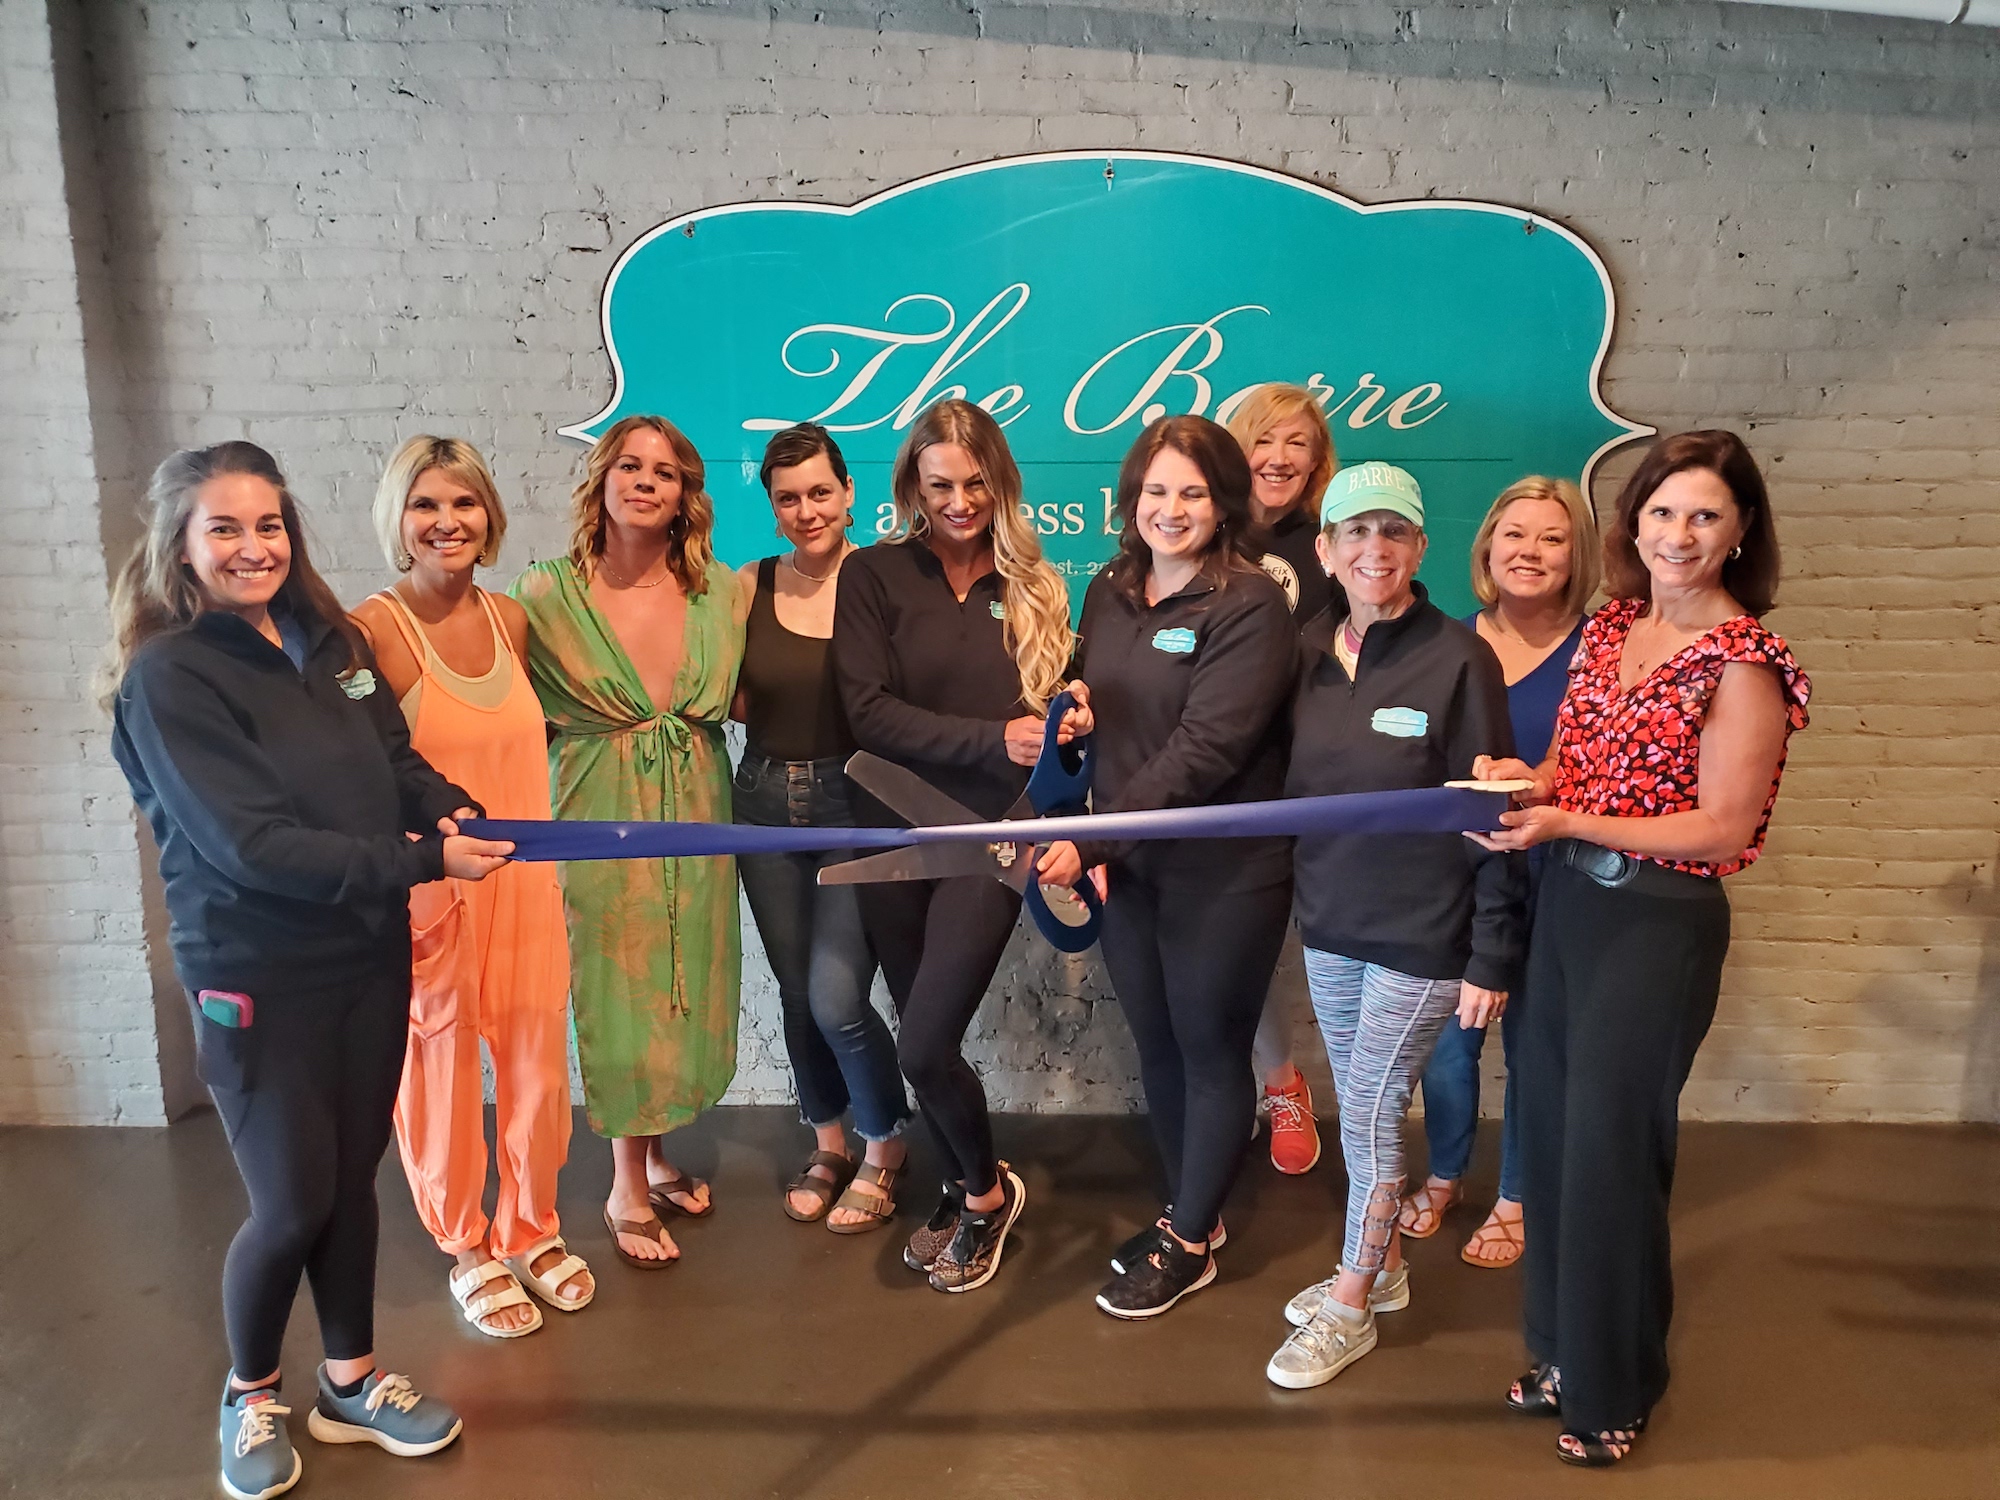 Shalanta Gullett and Jessica Chamberlain cut the ribbon together, celebrating The Barre: A Fitness Boutique membership into the Winchester-Clark County Chamber of Commerce.